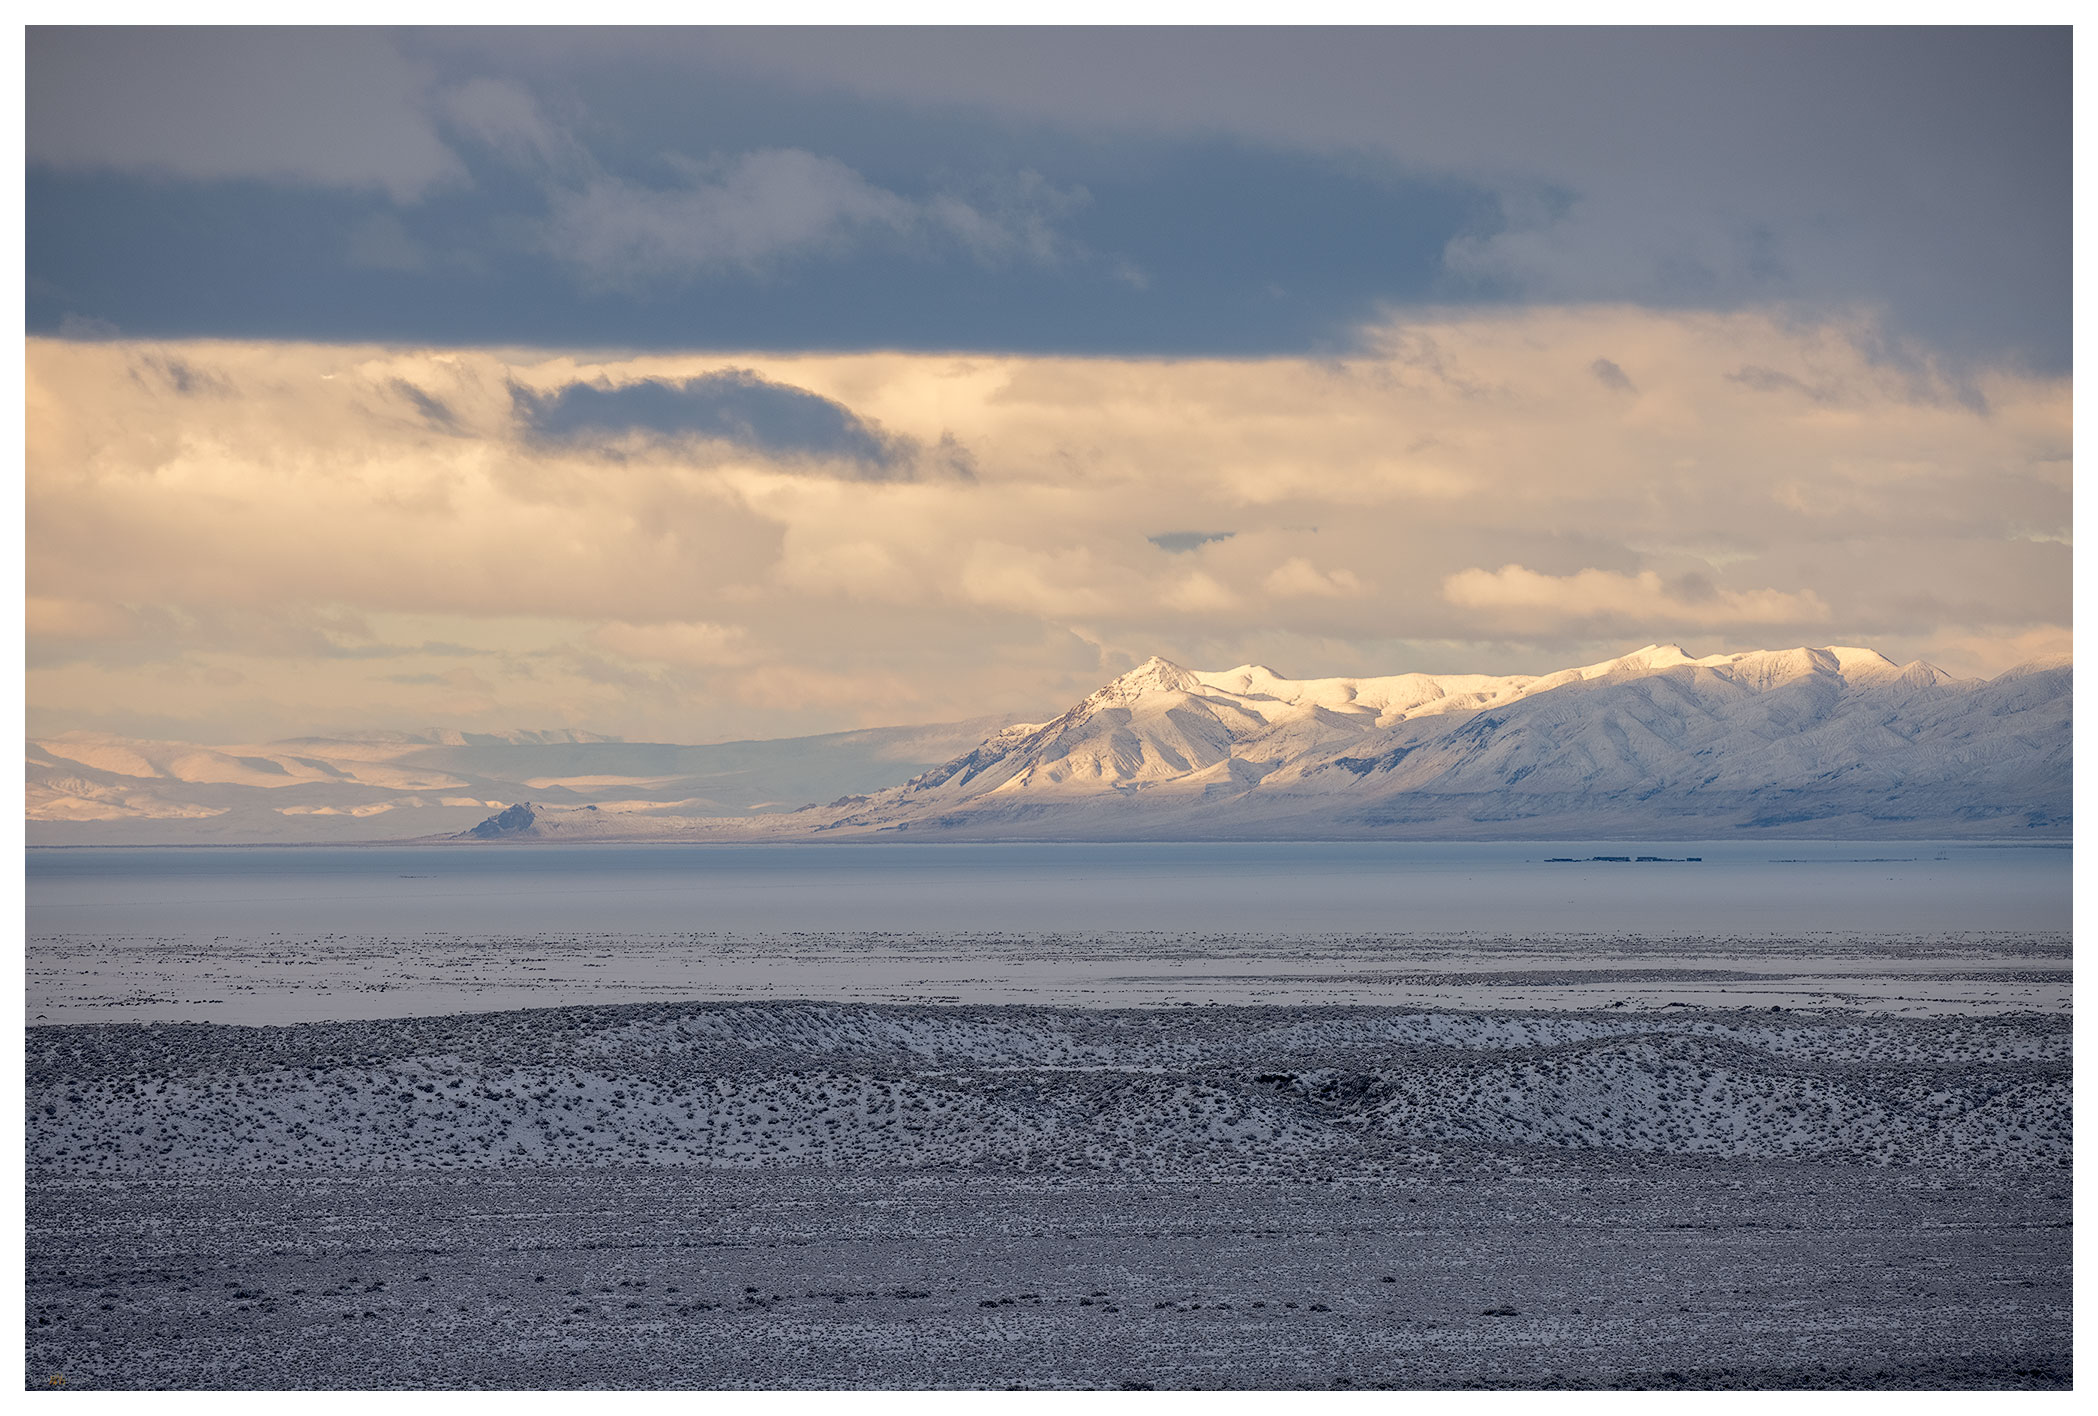 Landscape Photography: Overland in Nevada’s Carson Sink